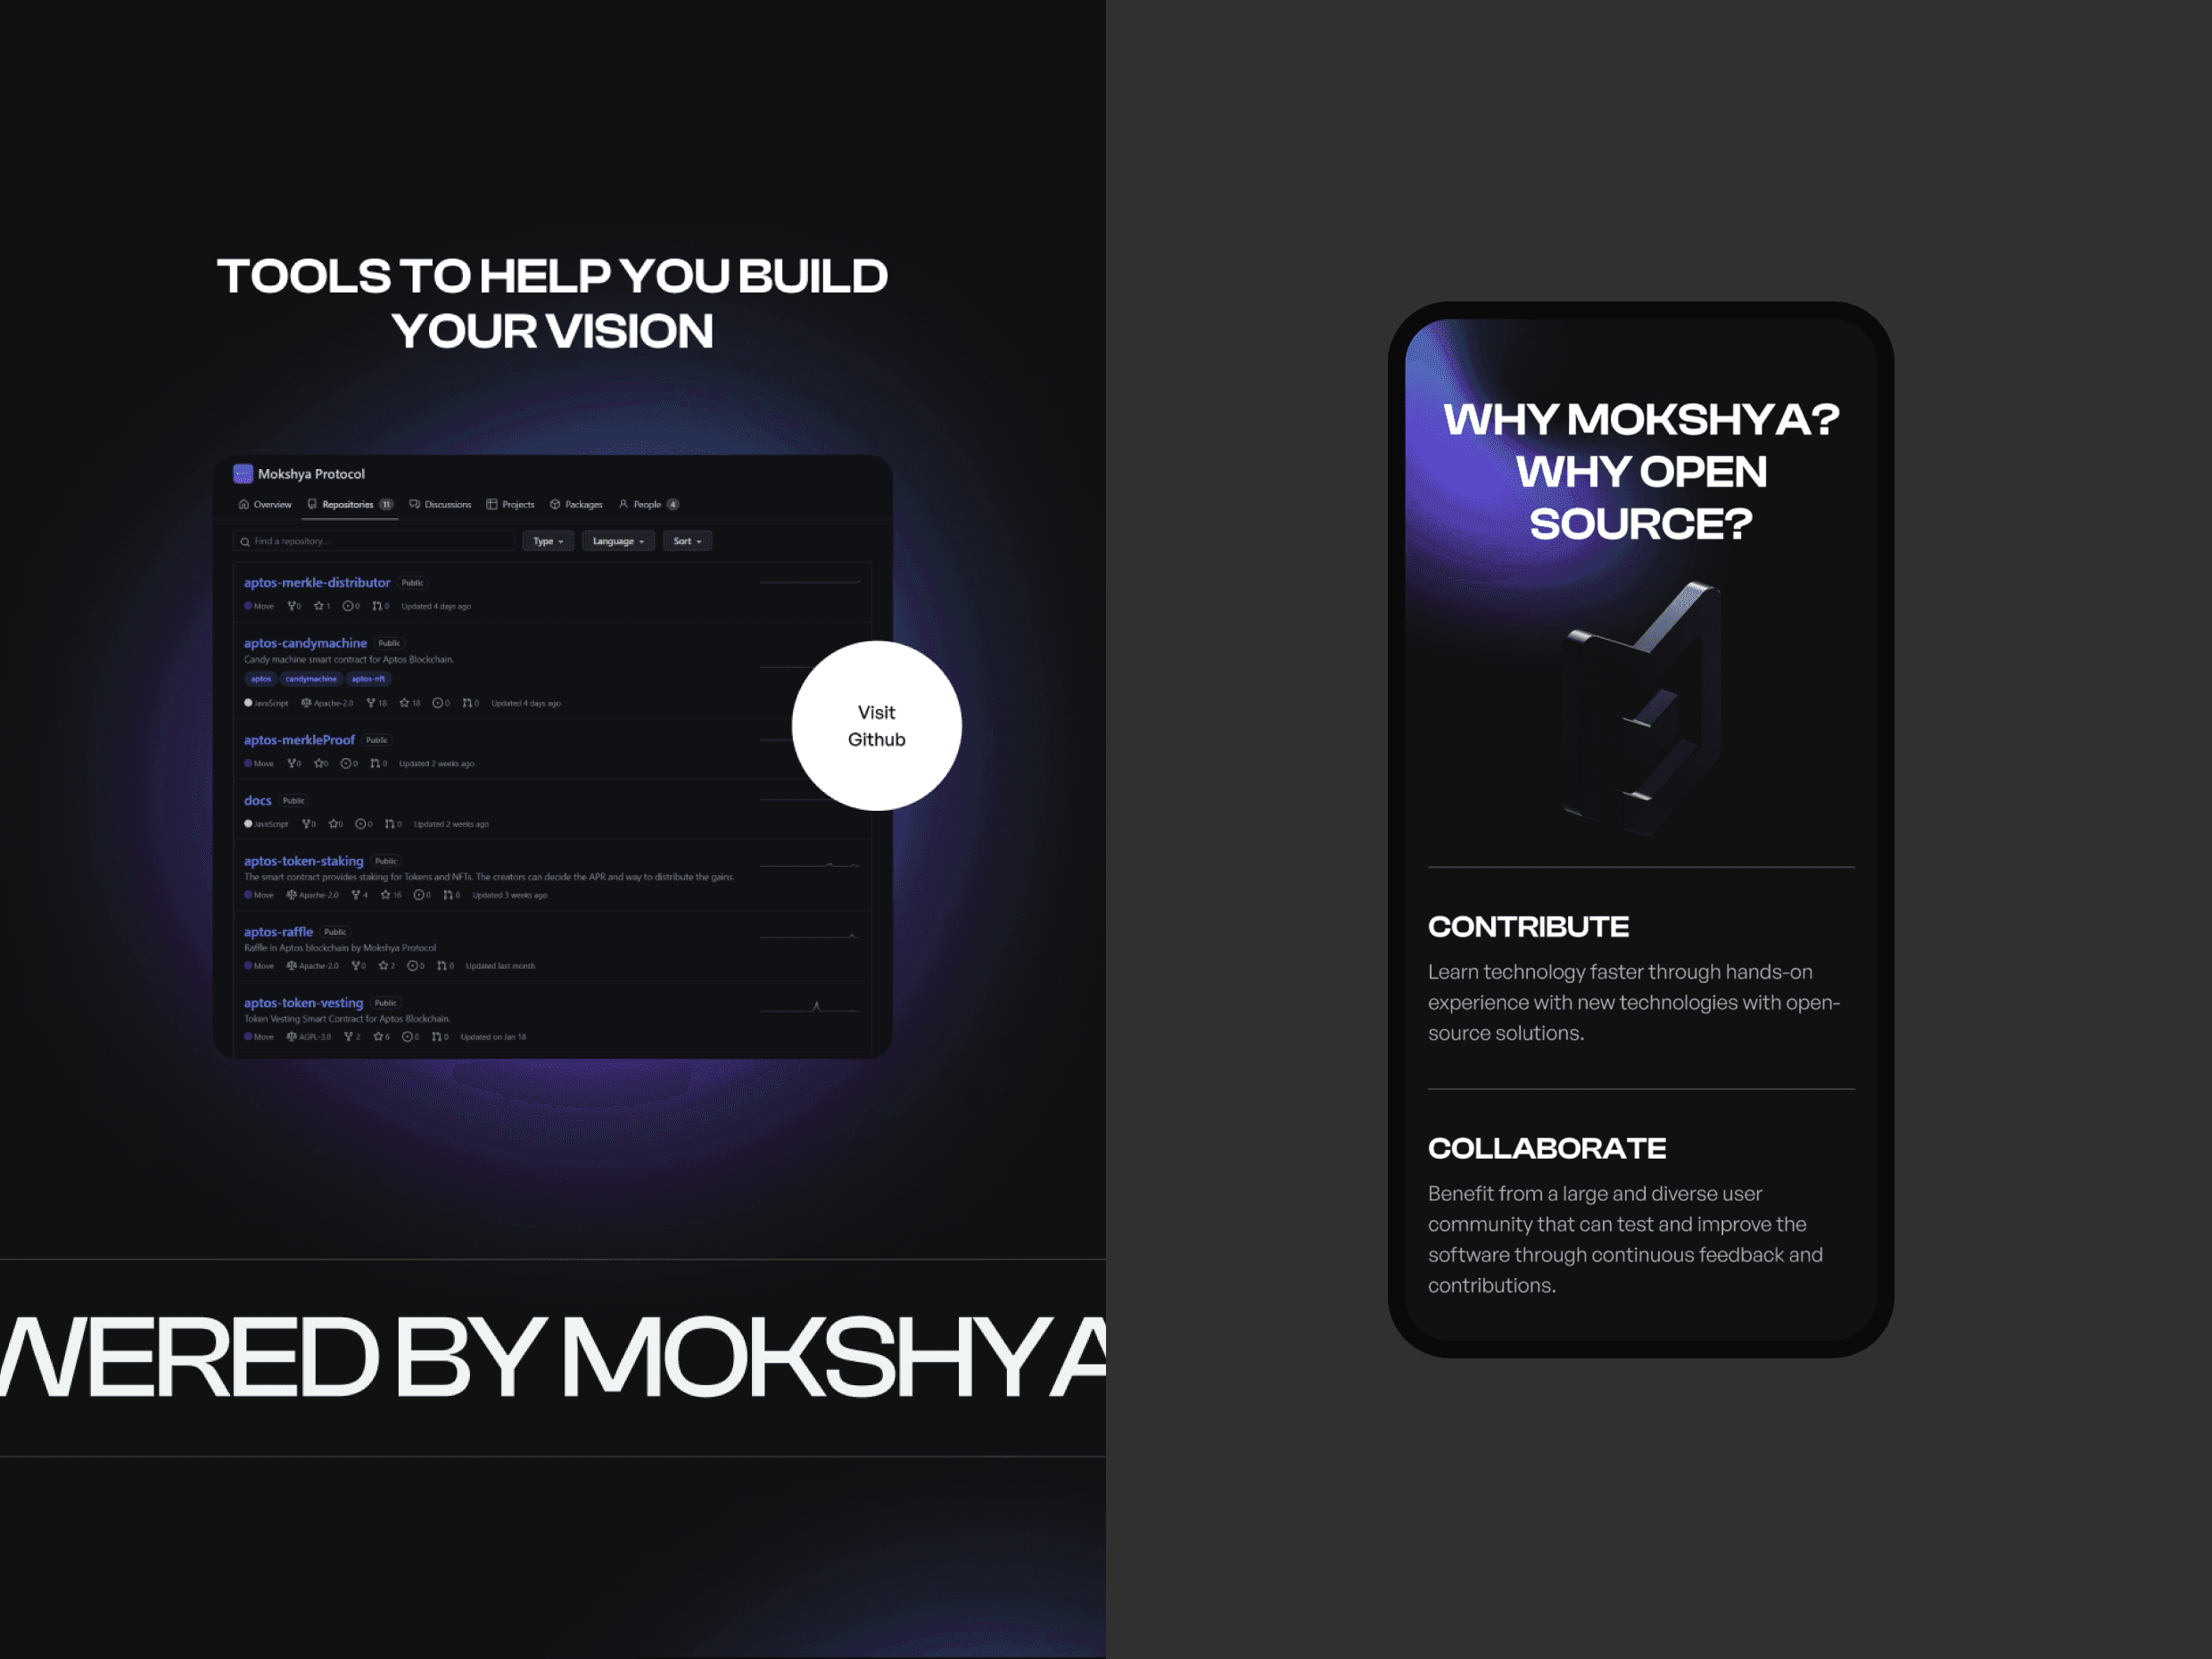 This image contains the tablet and mobile view of Mokshya Protocol